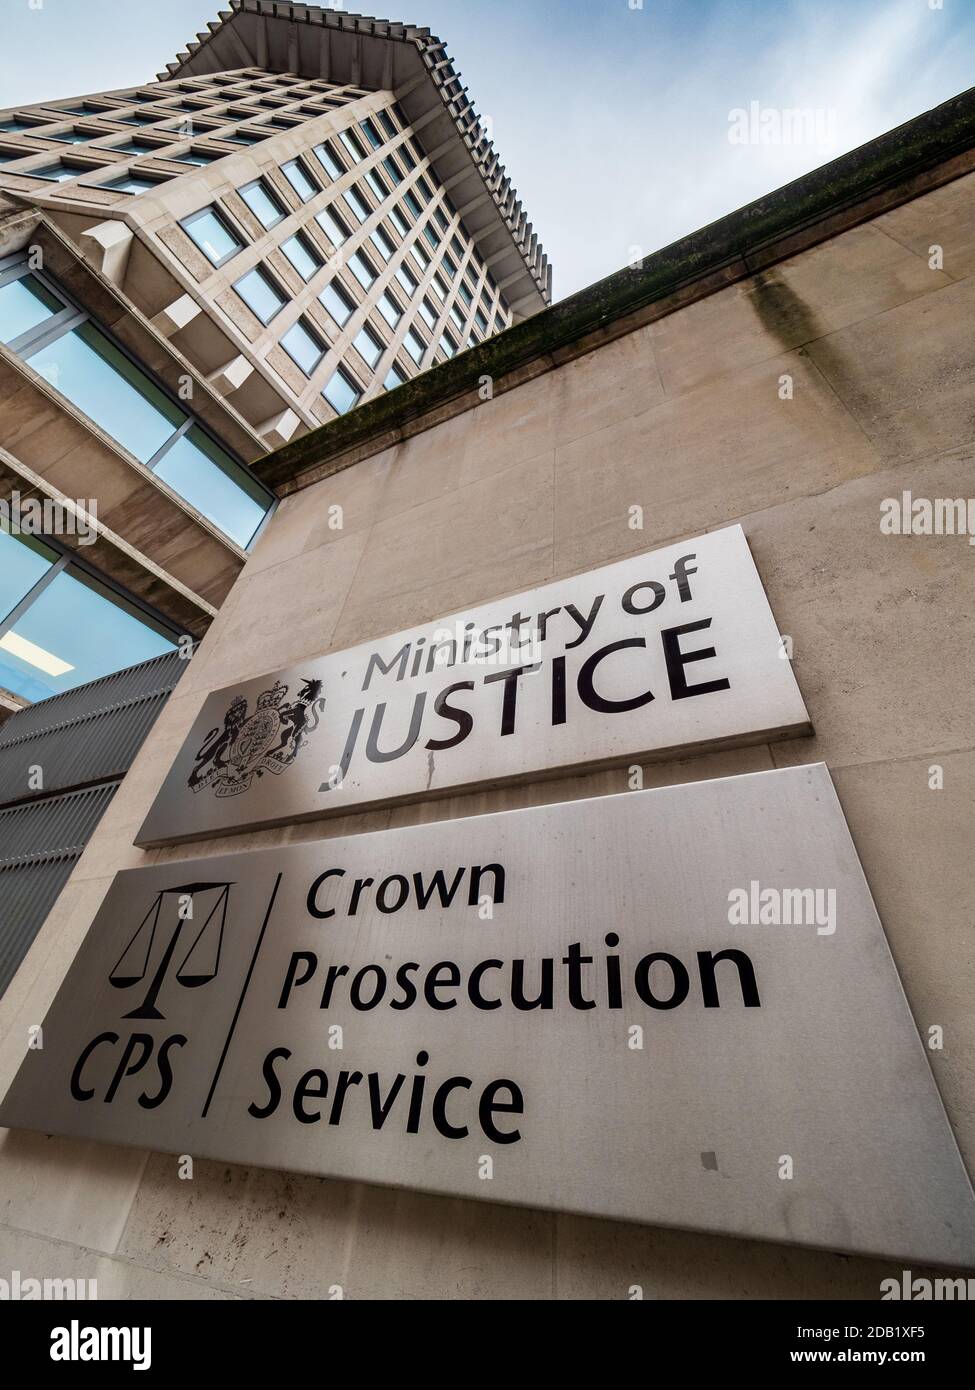 UK Ministry of Justice & Crown Prosecution Service - Offices of the Ministry of Justice & Crown Prosecution Service Offices, Petty France, London Stock Photo